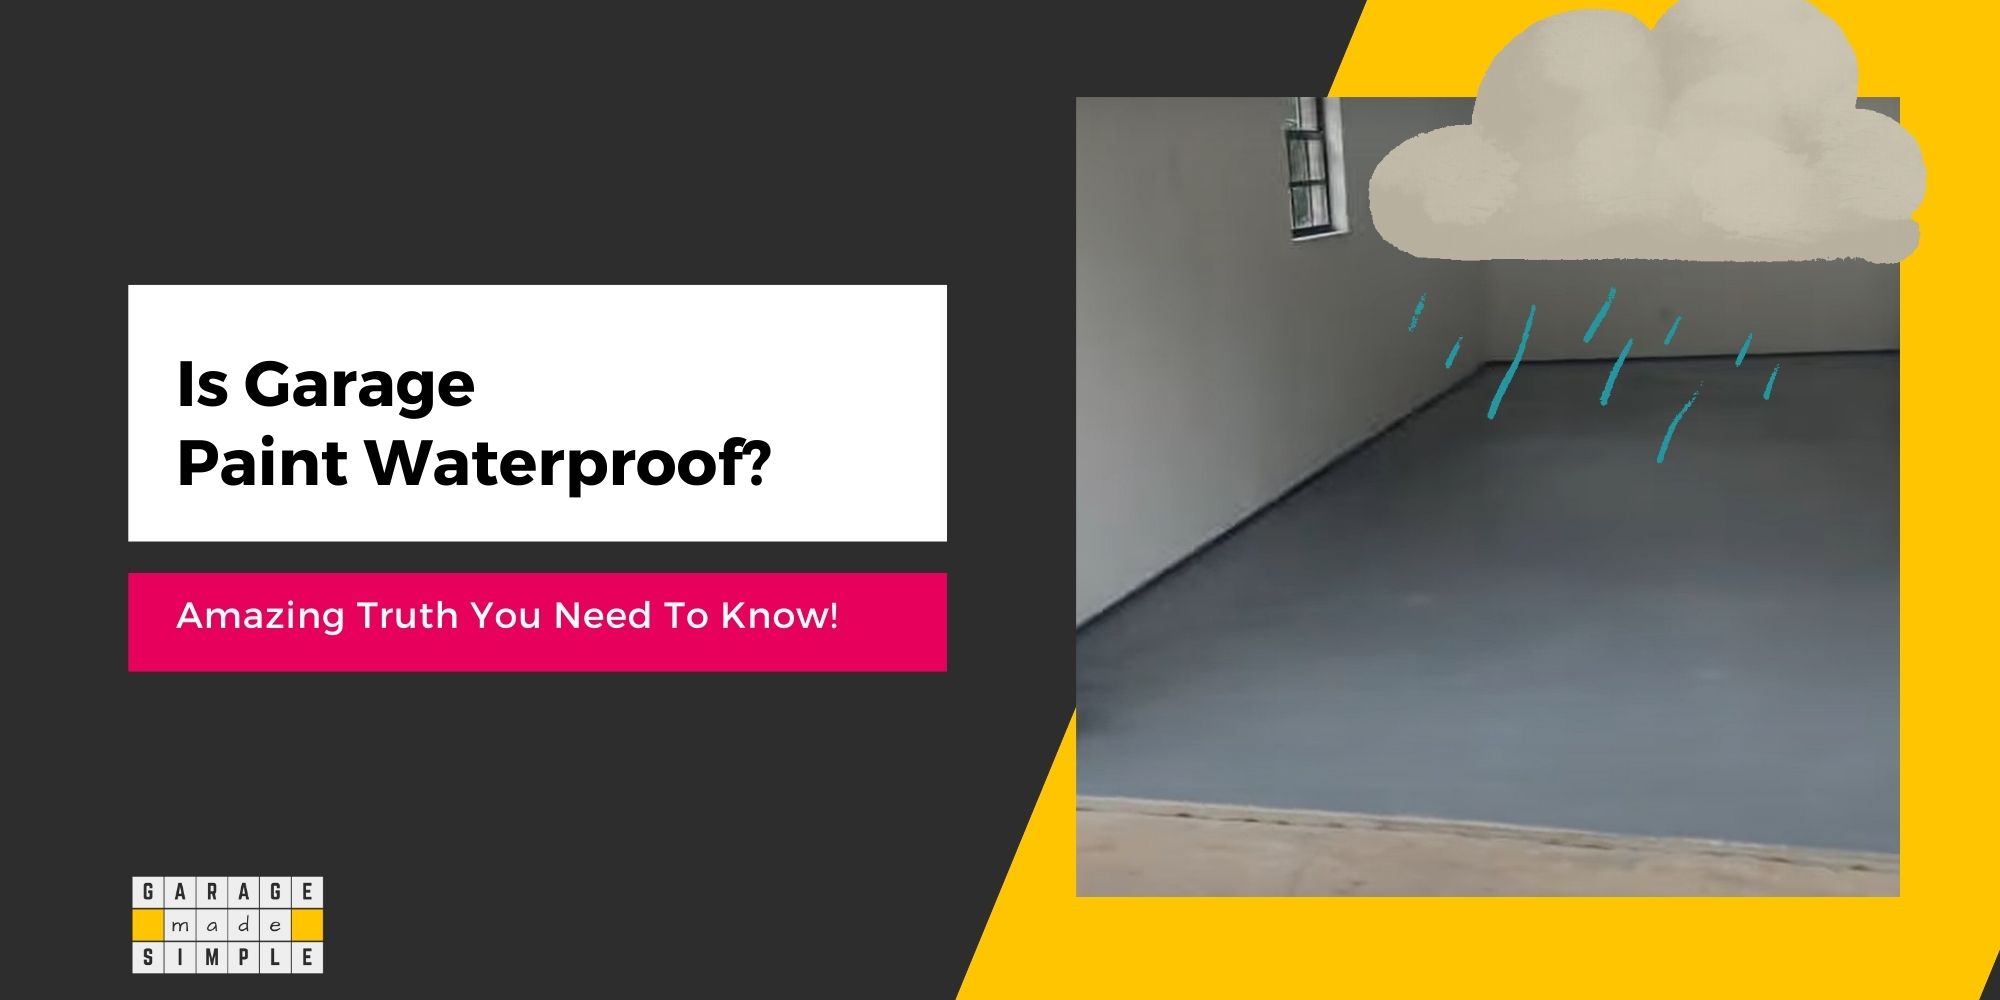 Is Garage Paint Waterproof? (Amazing Truth You Need to Know!)